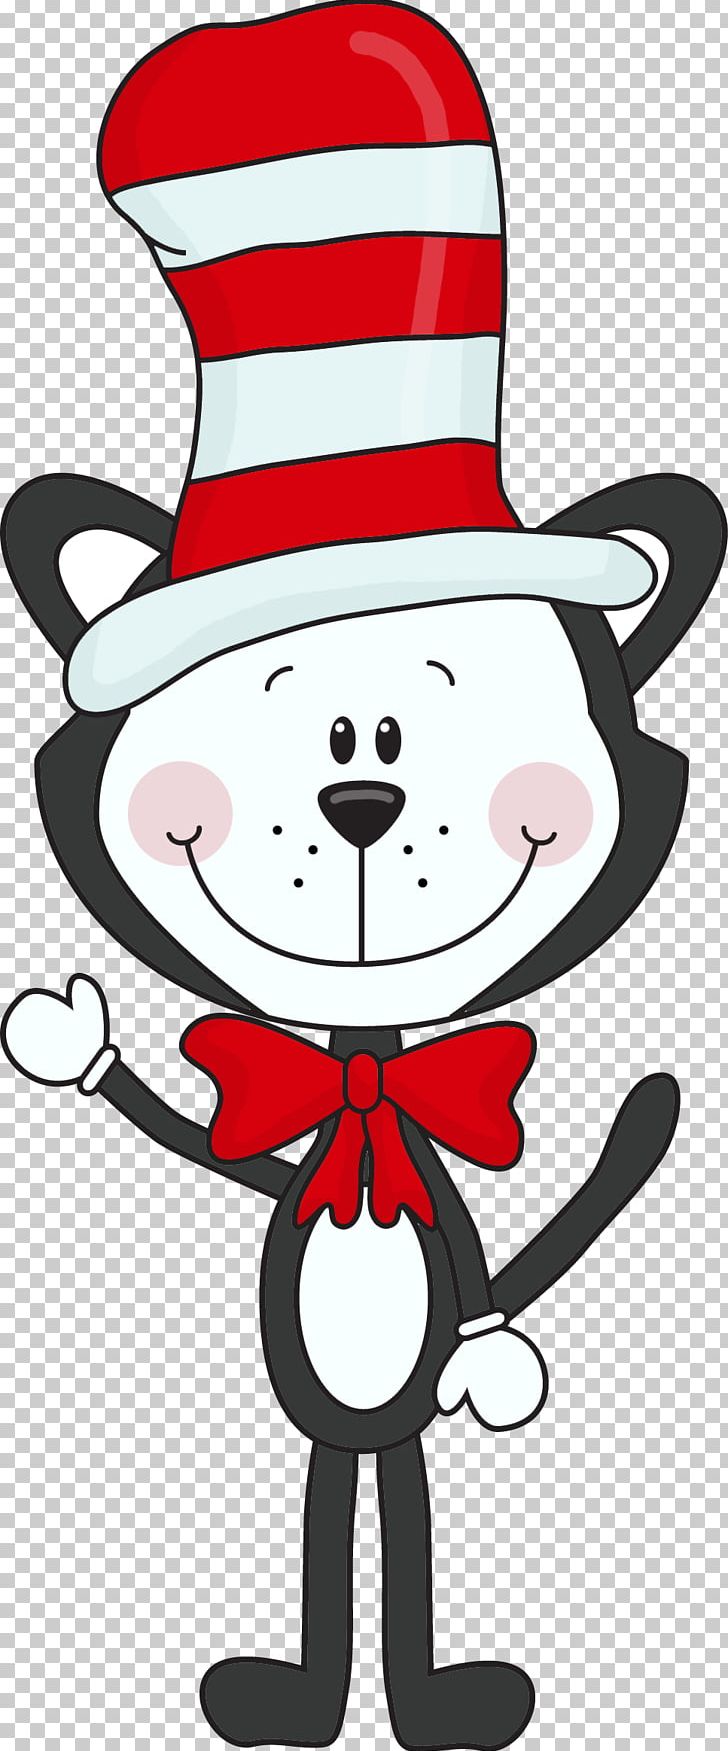 The Cat In The Hat Green Eggs And Ham The Foot Book One Fish PNG, Clipart, Art, Artwork, Book, Cat In The Hat, Child Free PNG Download